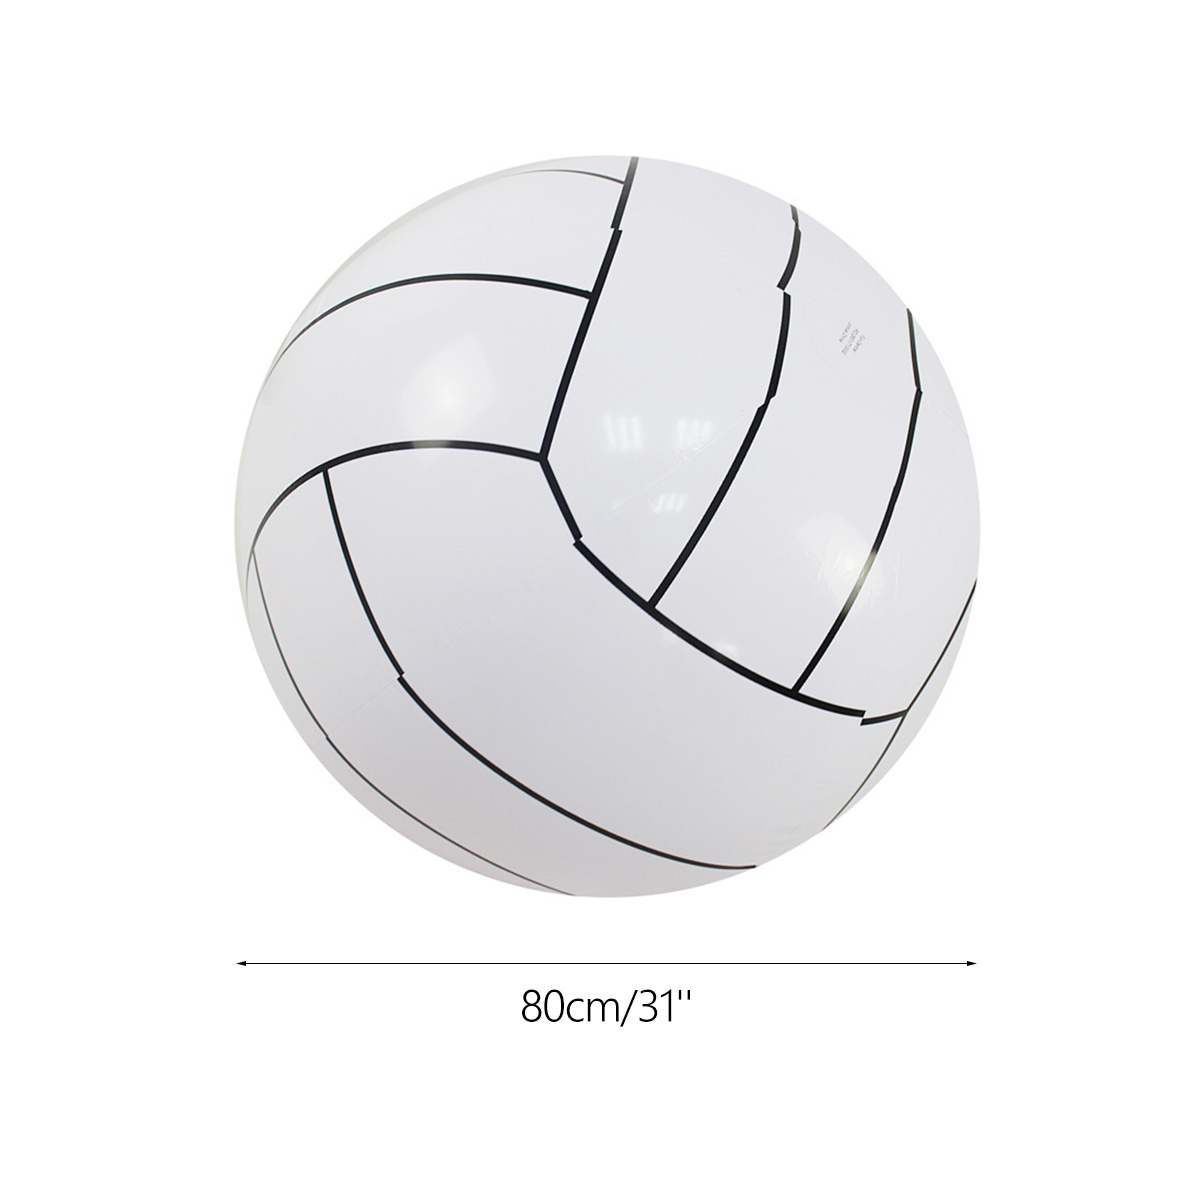 80cm-Inflatable-Beach-Ball-Adult-Kids-Swimming-Pool-Water-Toys-Summer-Water-Sport-Play-Ball-Gift-Cam-1723675-2